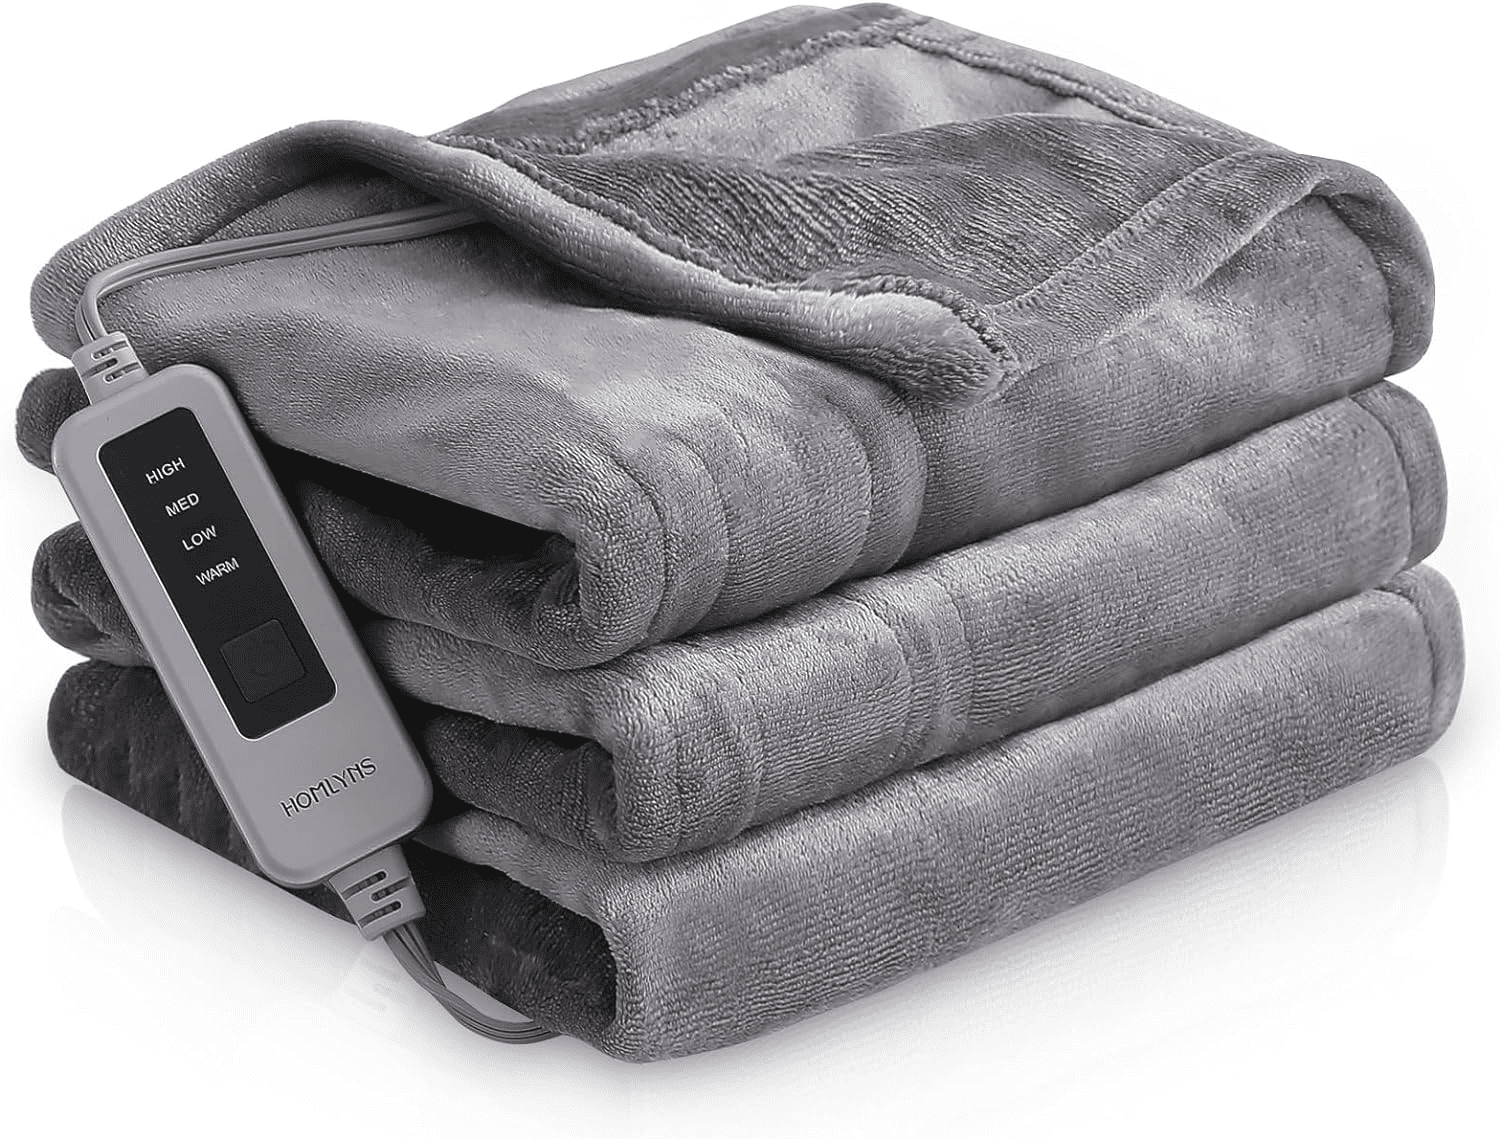 Homlyns electric blanket, auto off, maximum temperature feature, ir thermometer, heated blanket